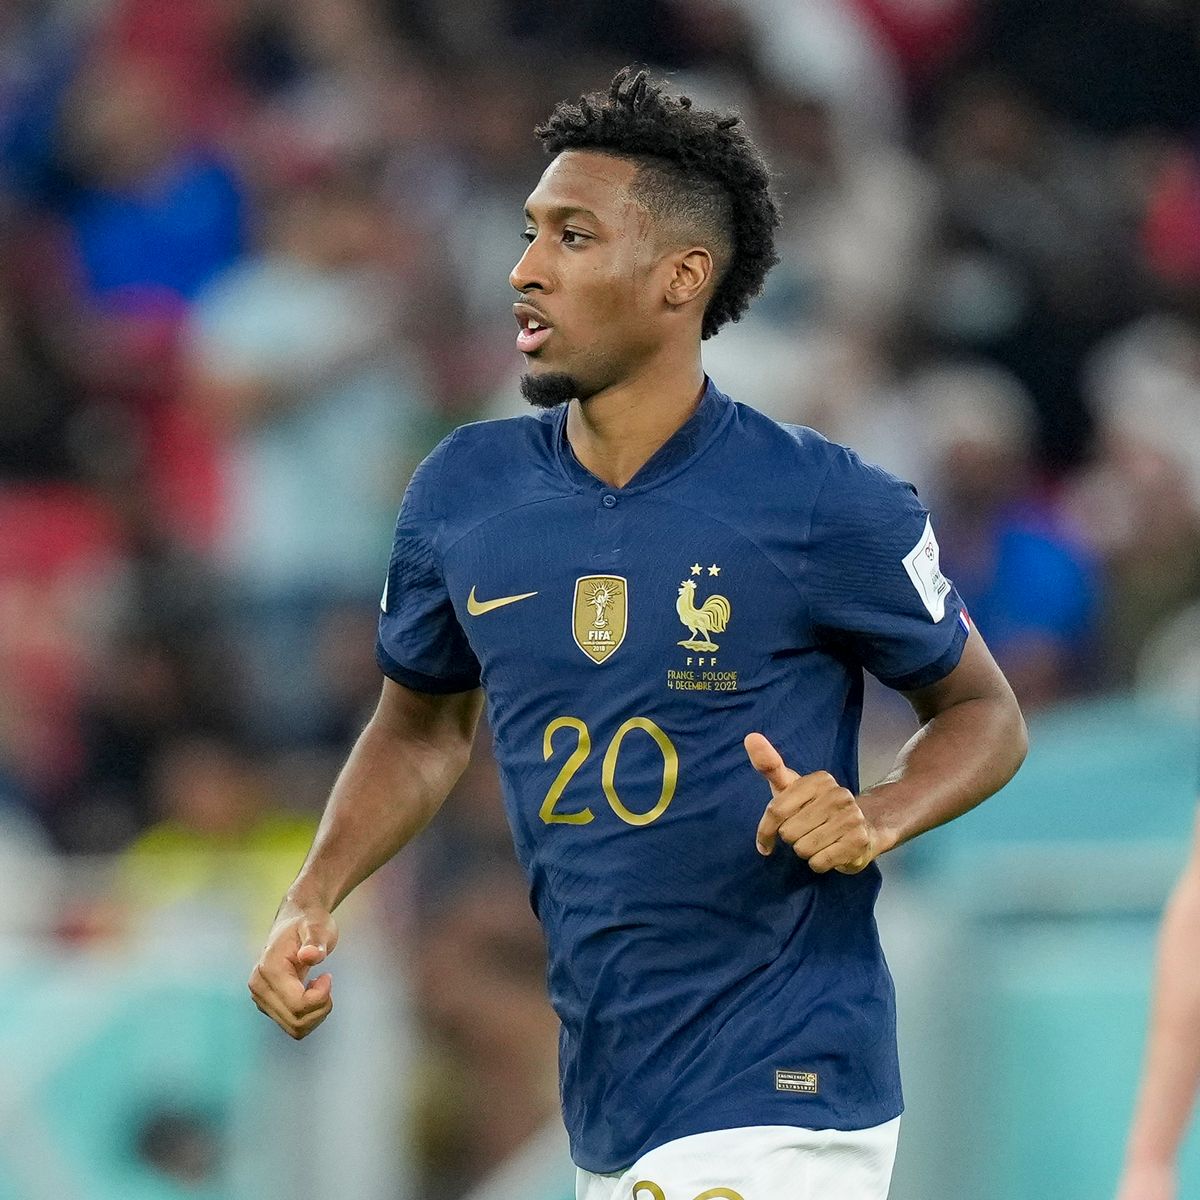 Concern growing in France camp as third player falls ill ahead of World Cup final